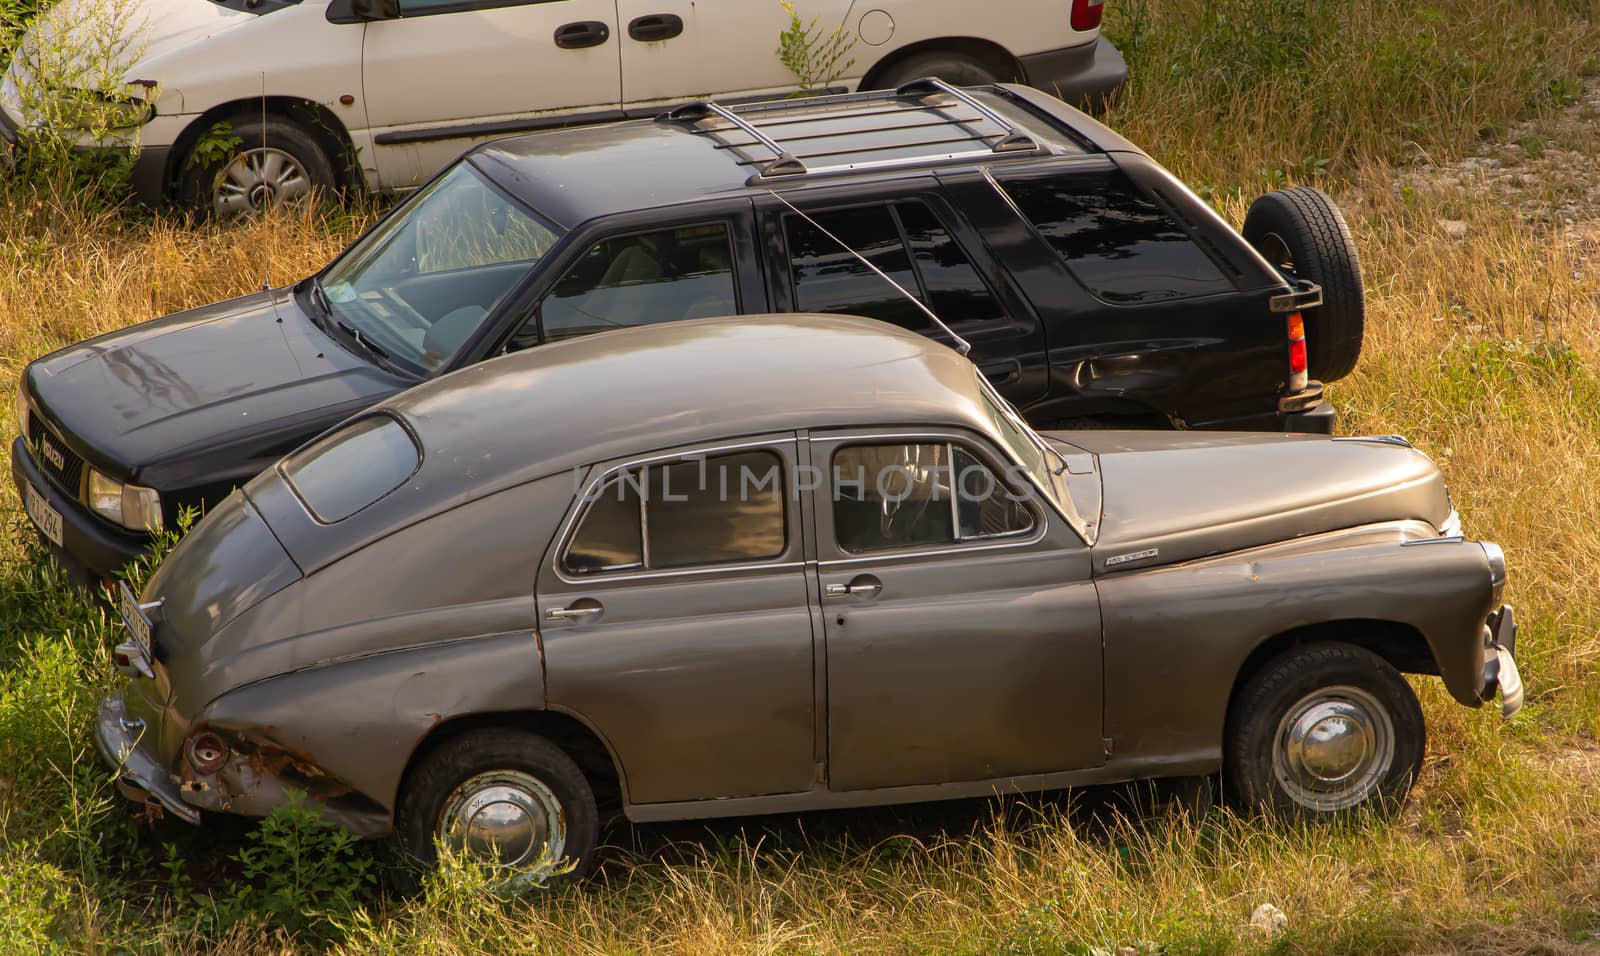 Chisinau, Moldova - July 14 2019. An old car parked next to a new one